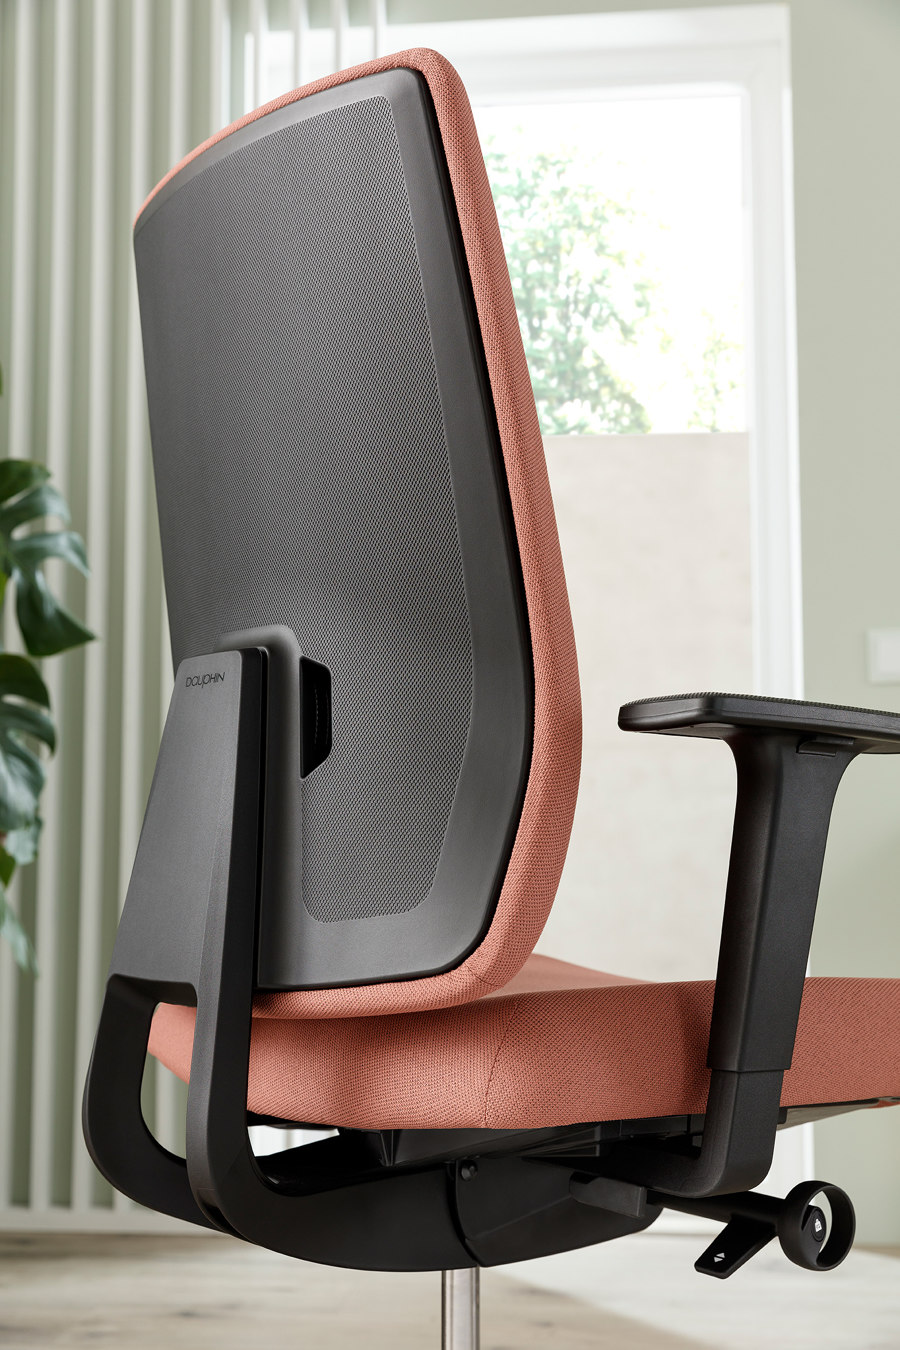 Dauphin's new office chair Indeed encourages correct sitting in the workplace | Nouveautés